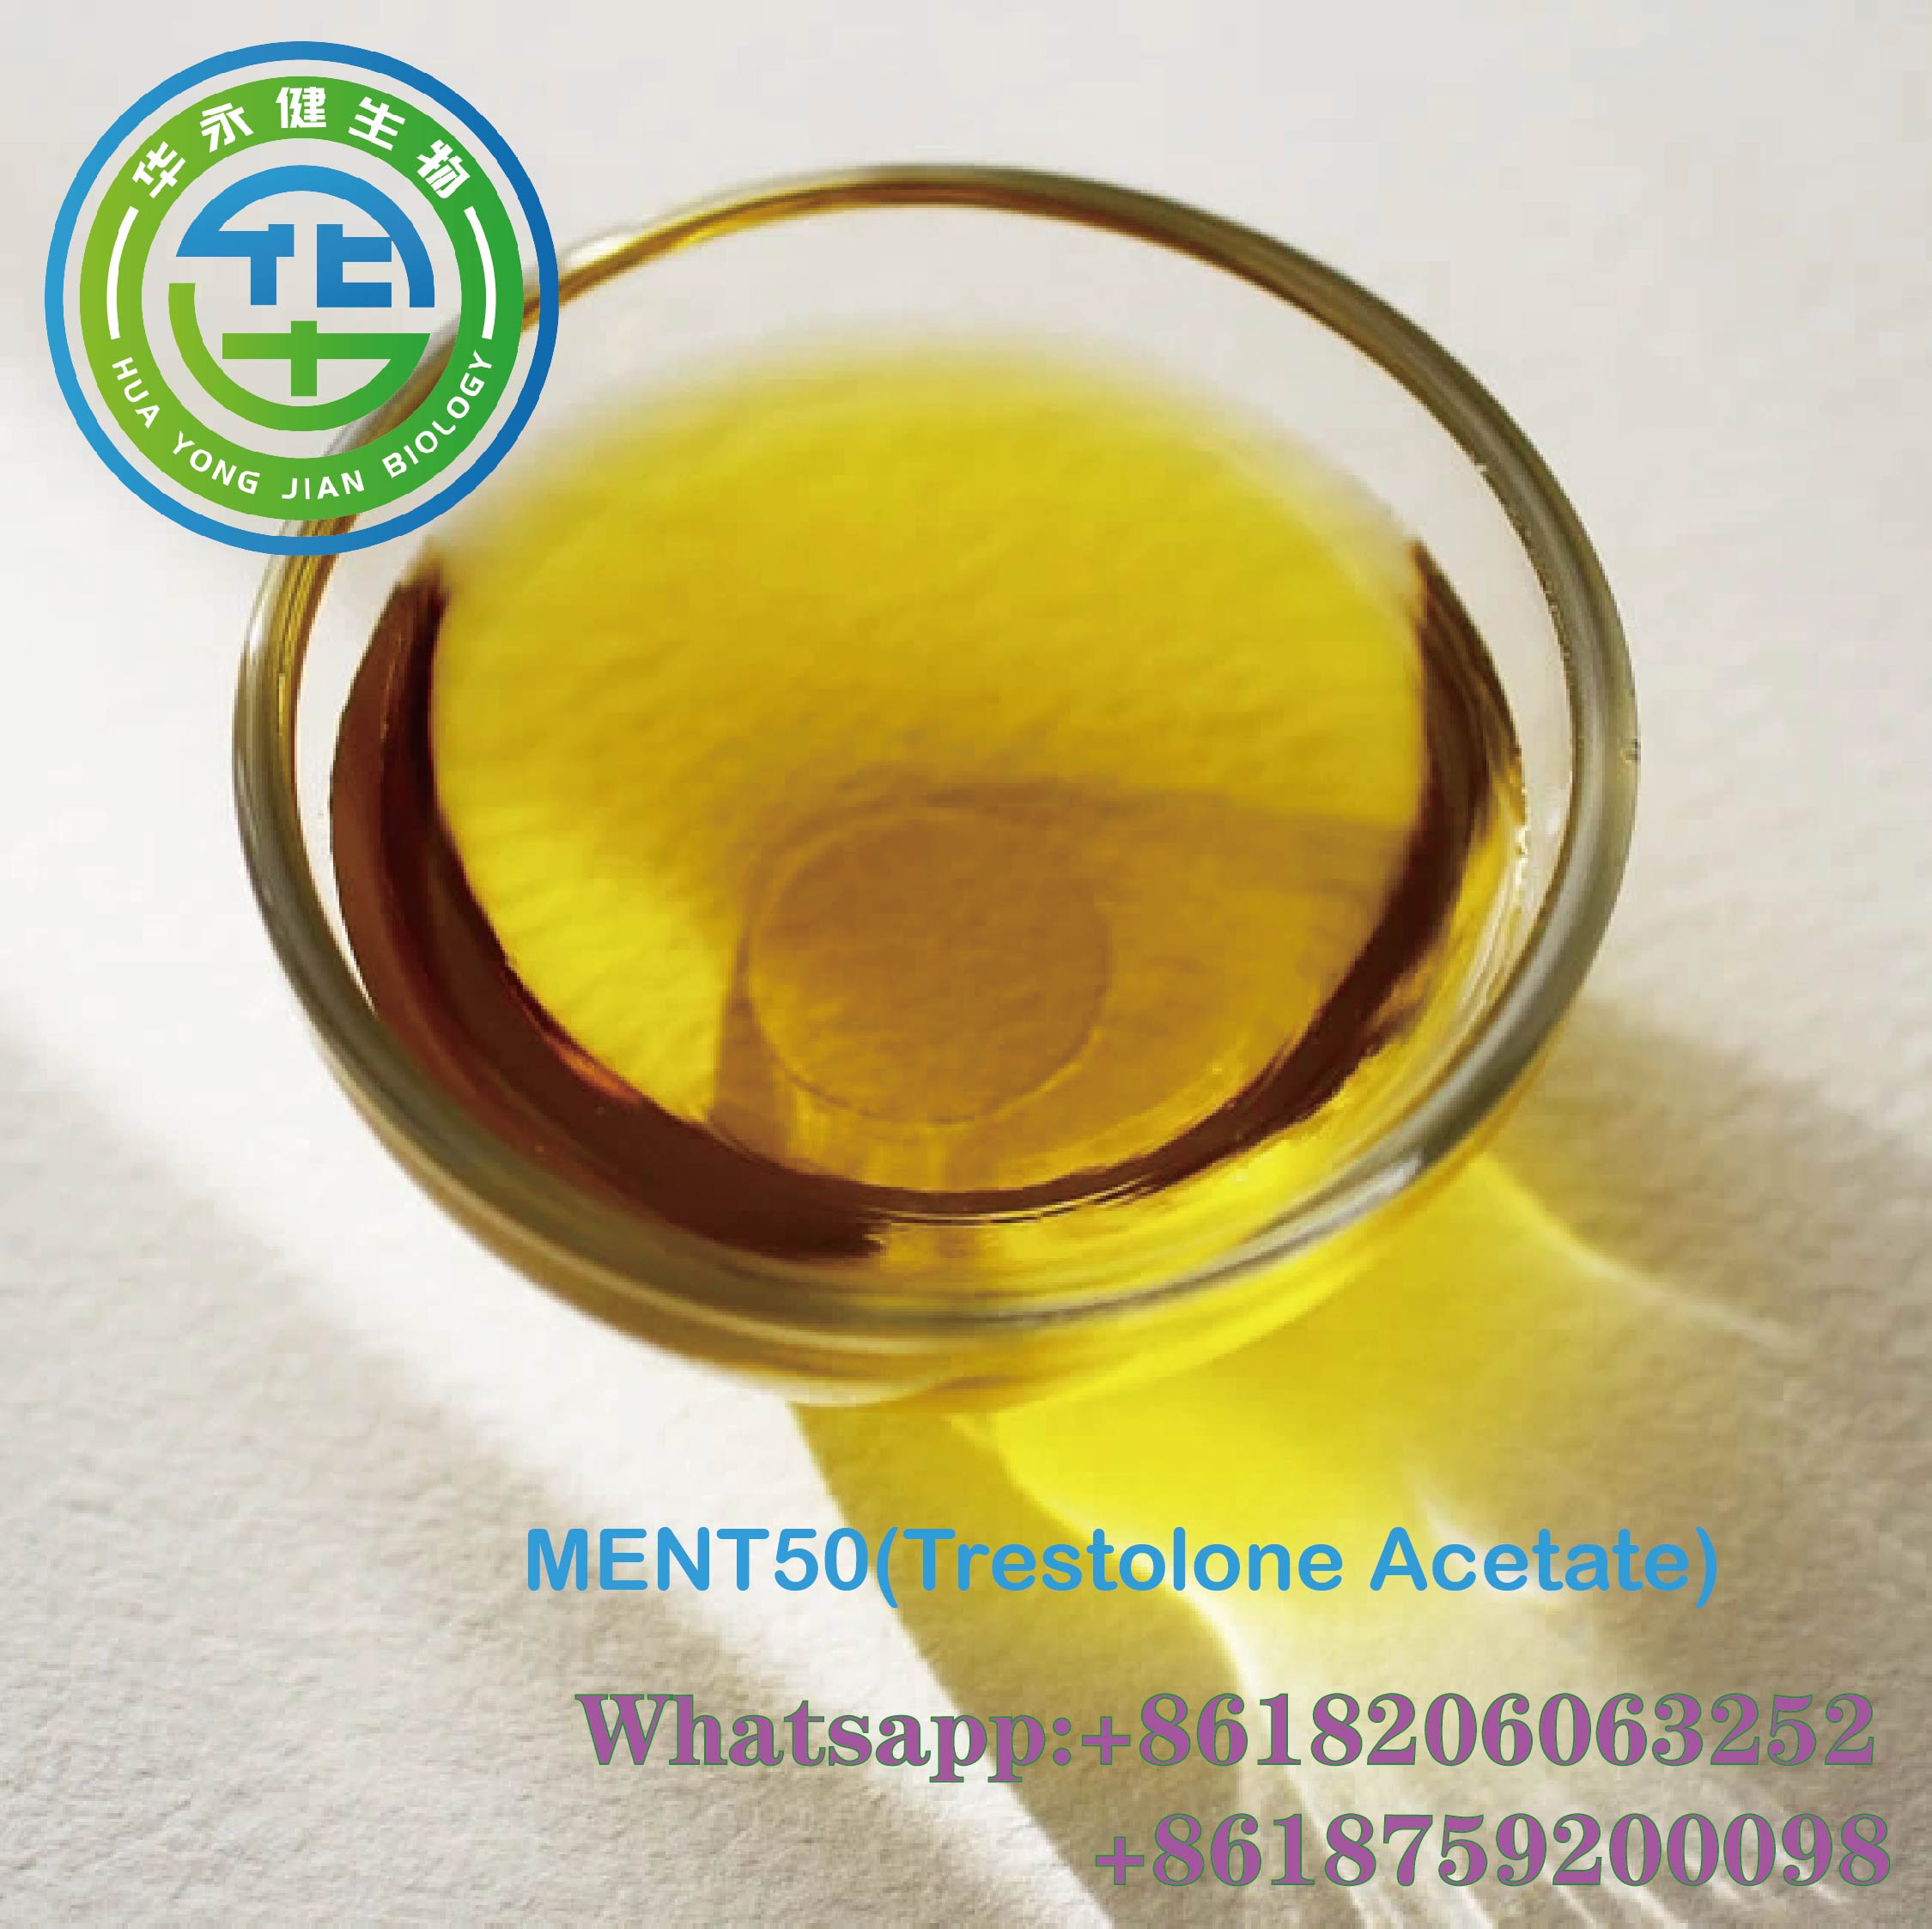 99 % Purity Trenbolone Acetate 50 Steroid MENT50 Yellow Oil for Bodybuilding 50mg/ml